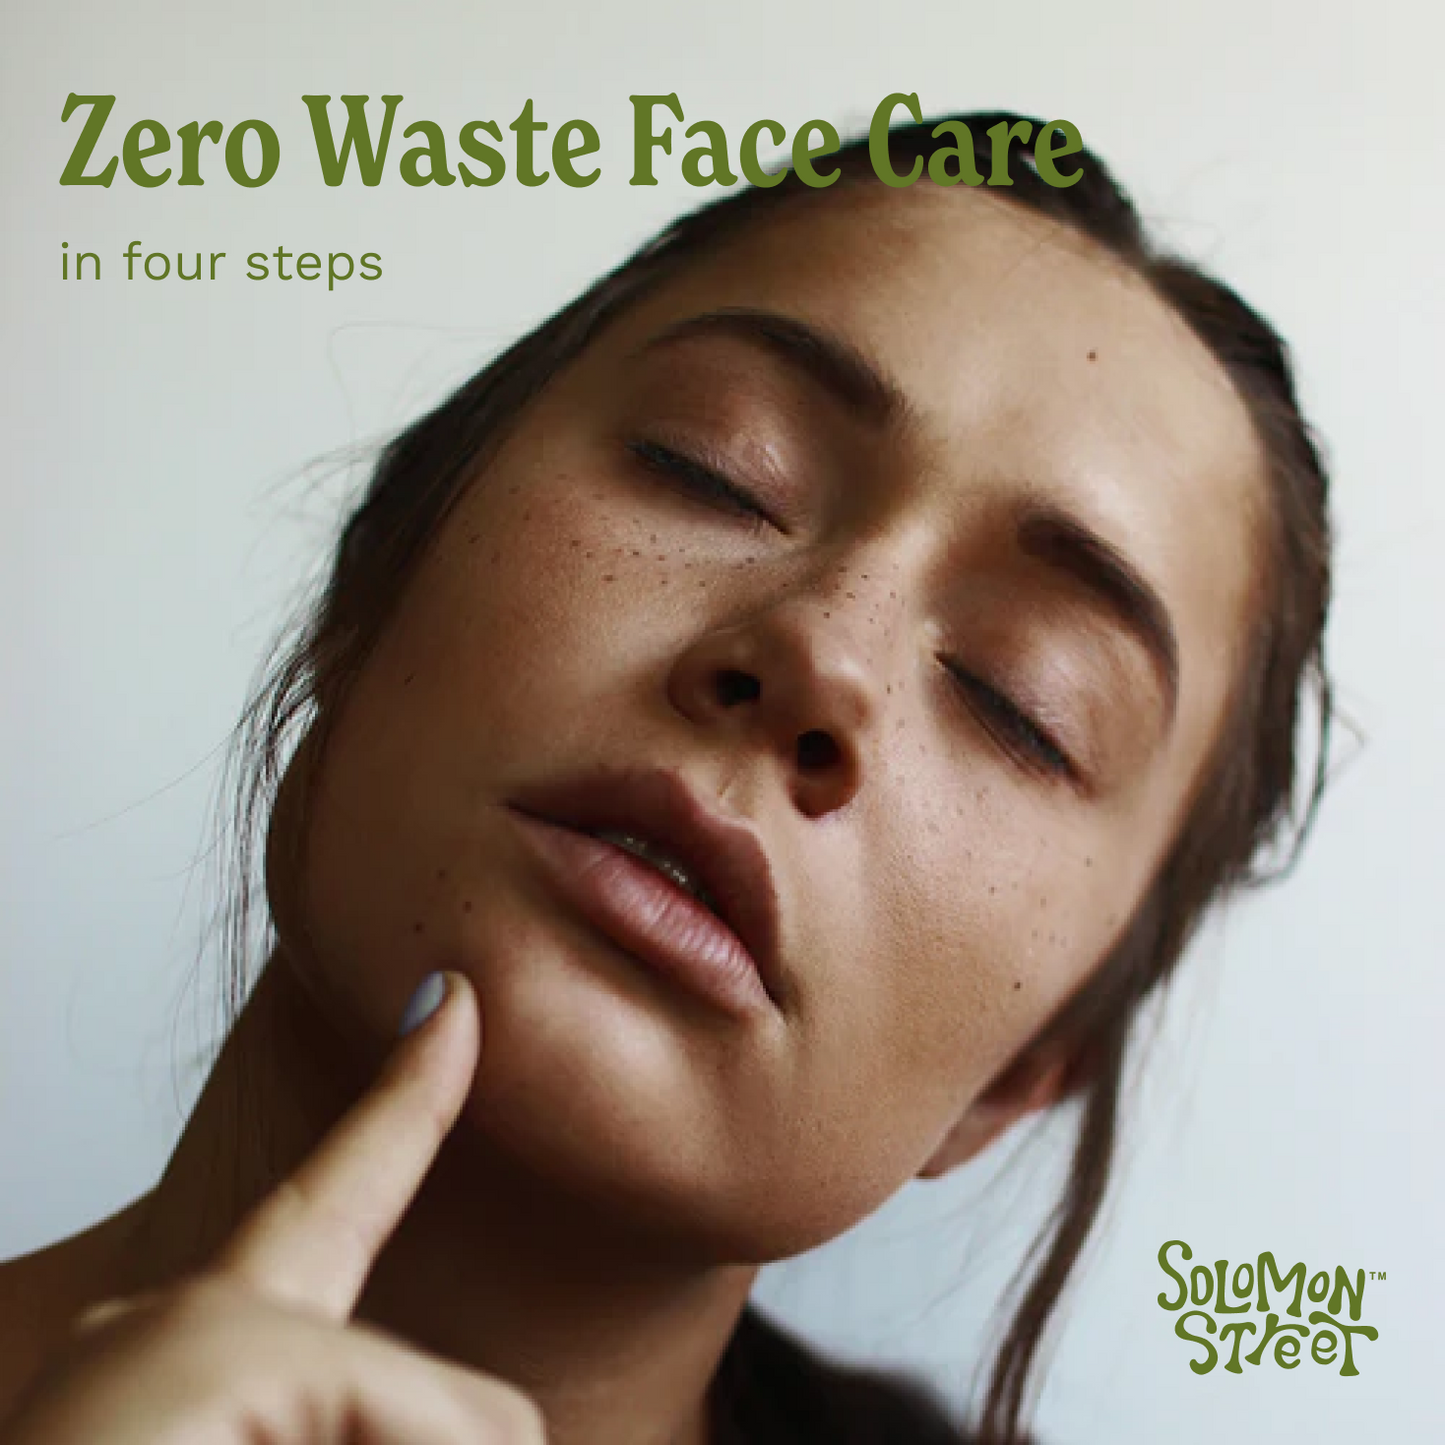 4 Steps to Zero Waste Face Care